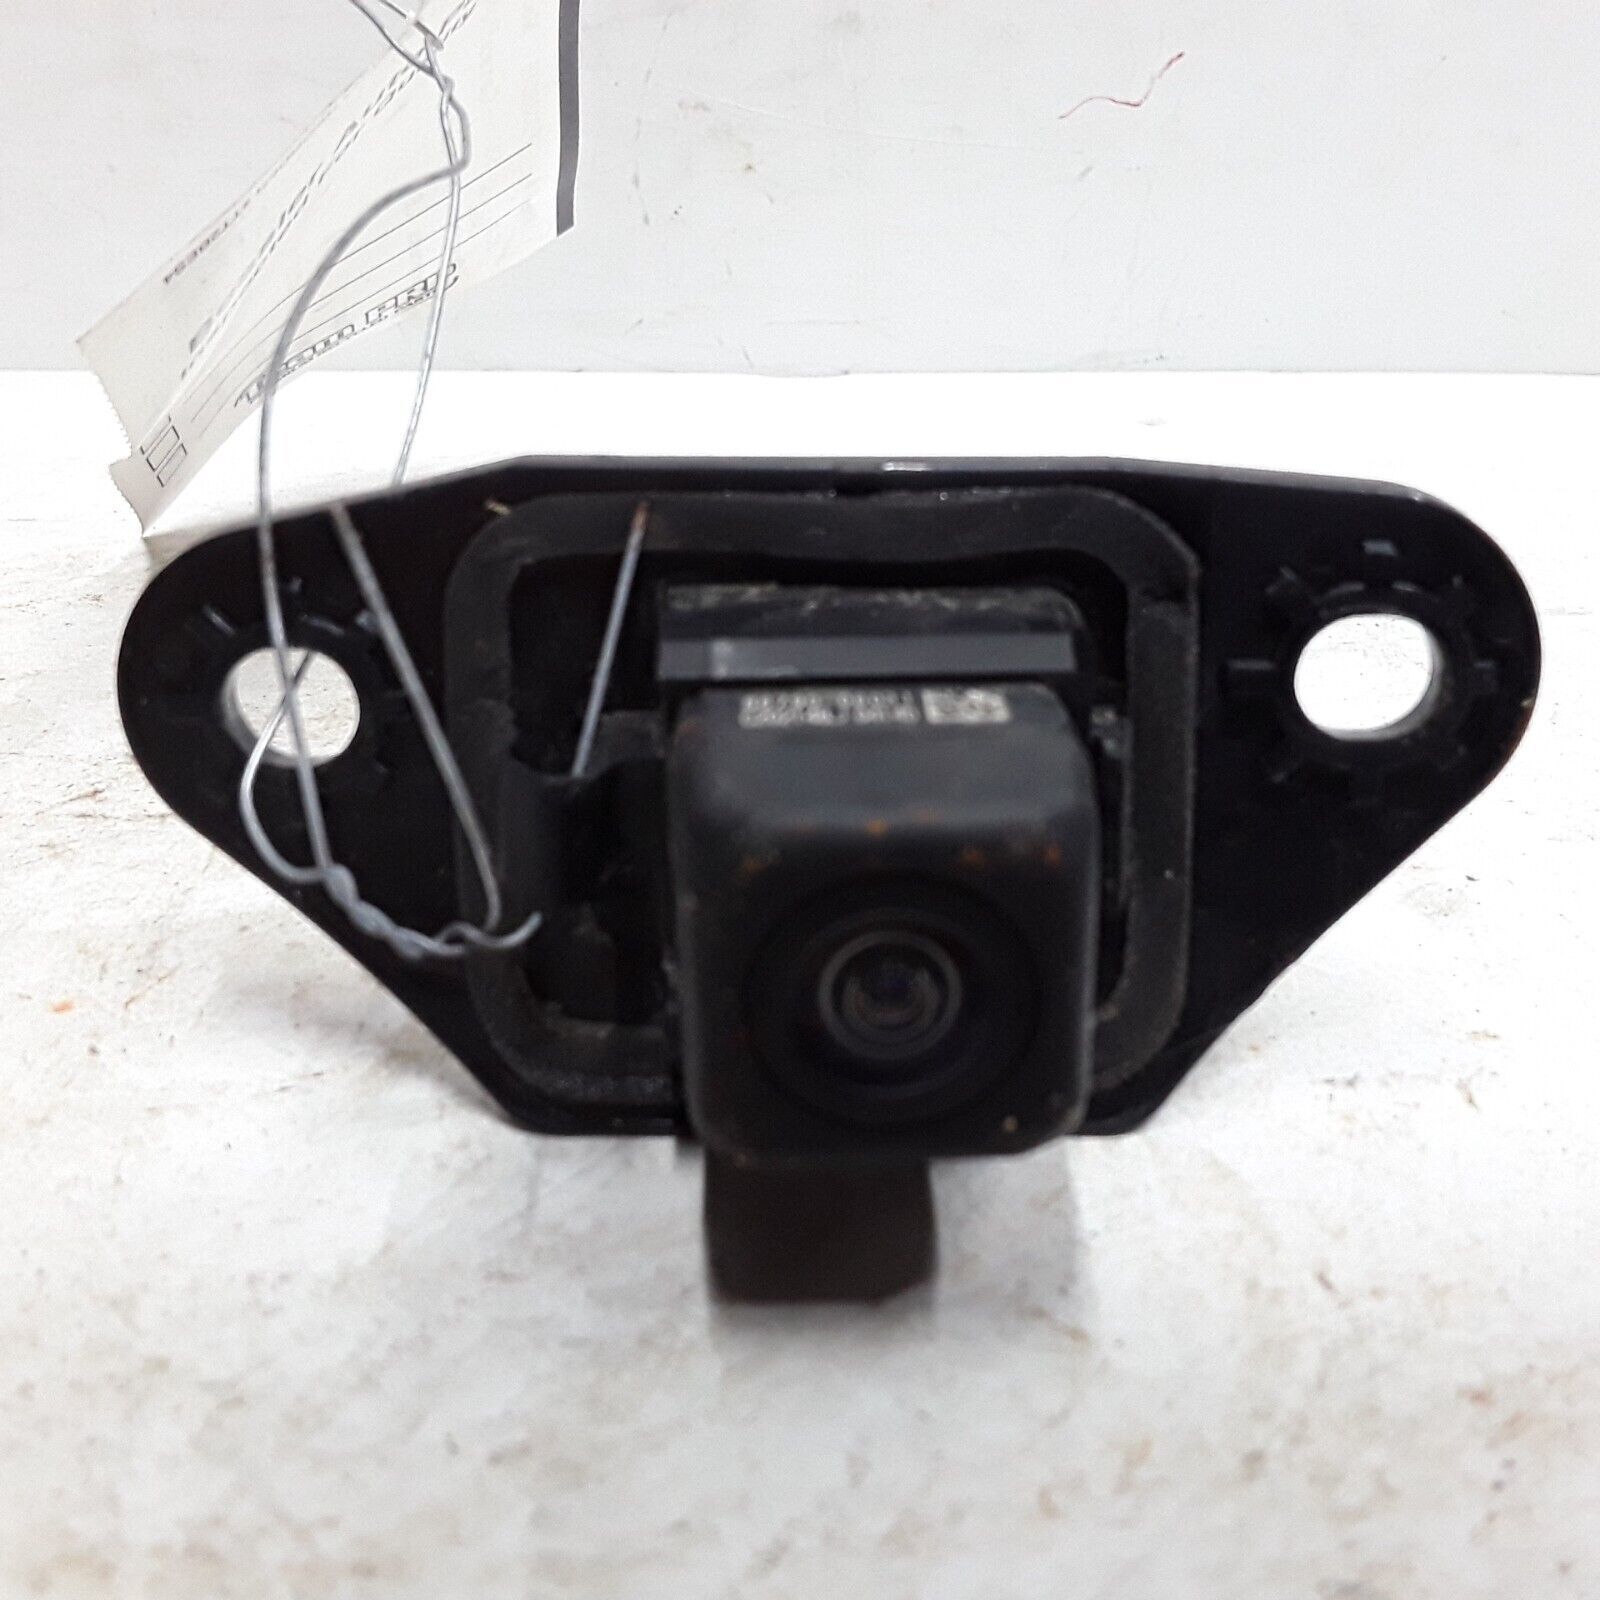 12 13 14 Toyota Camry camera projector lid mounted OEM 86790-06031 - $98.99